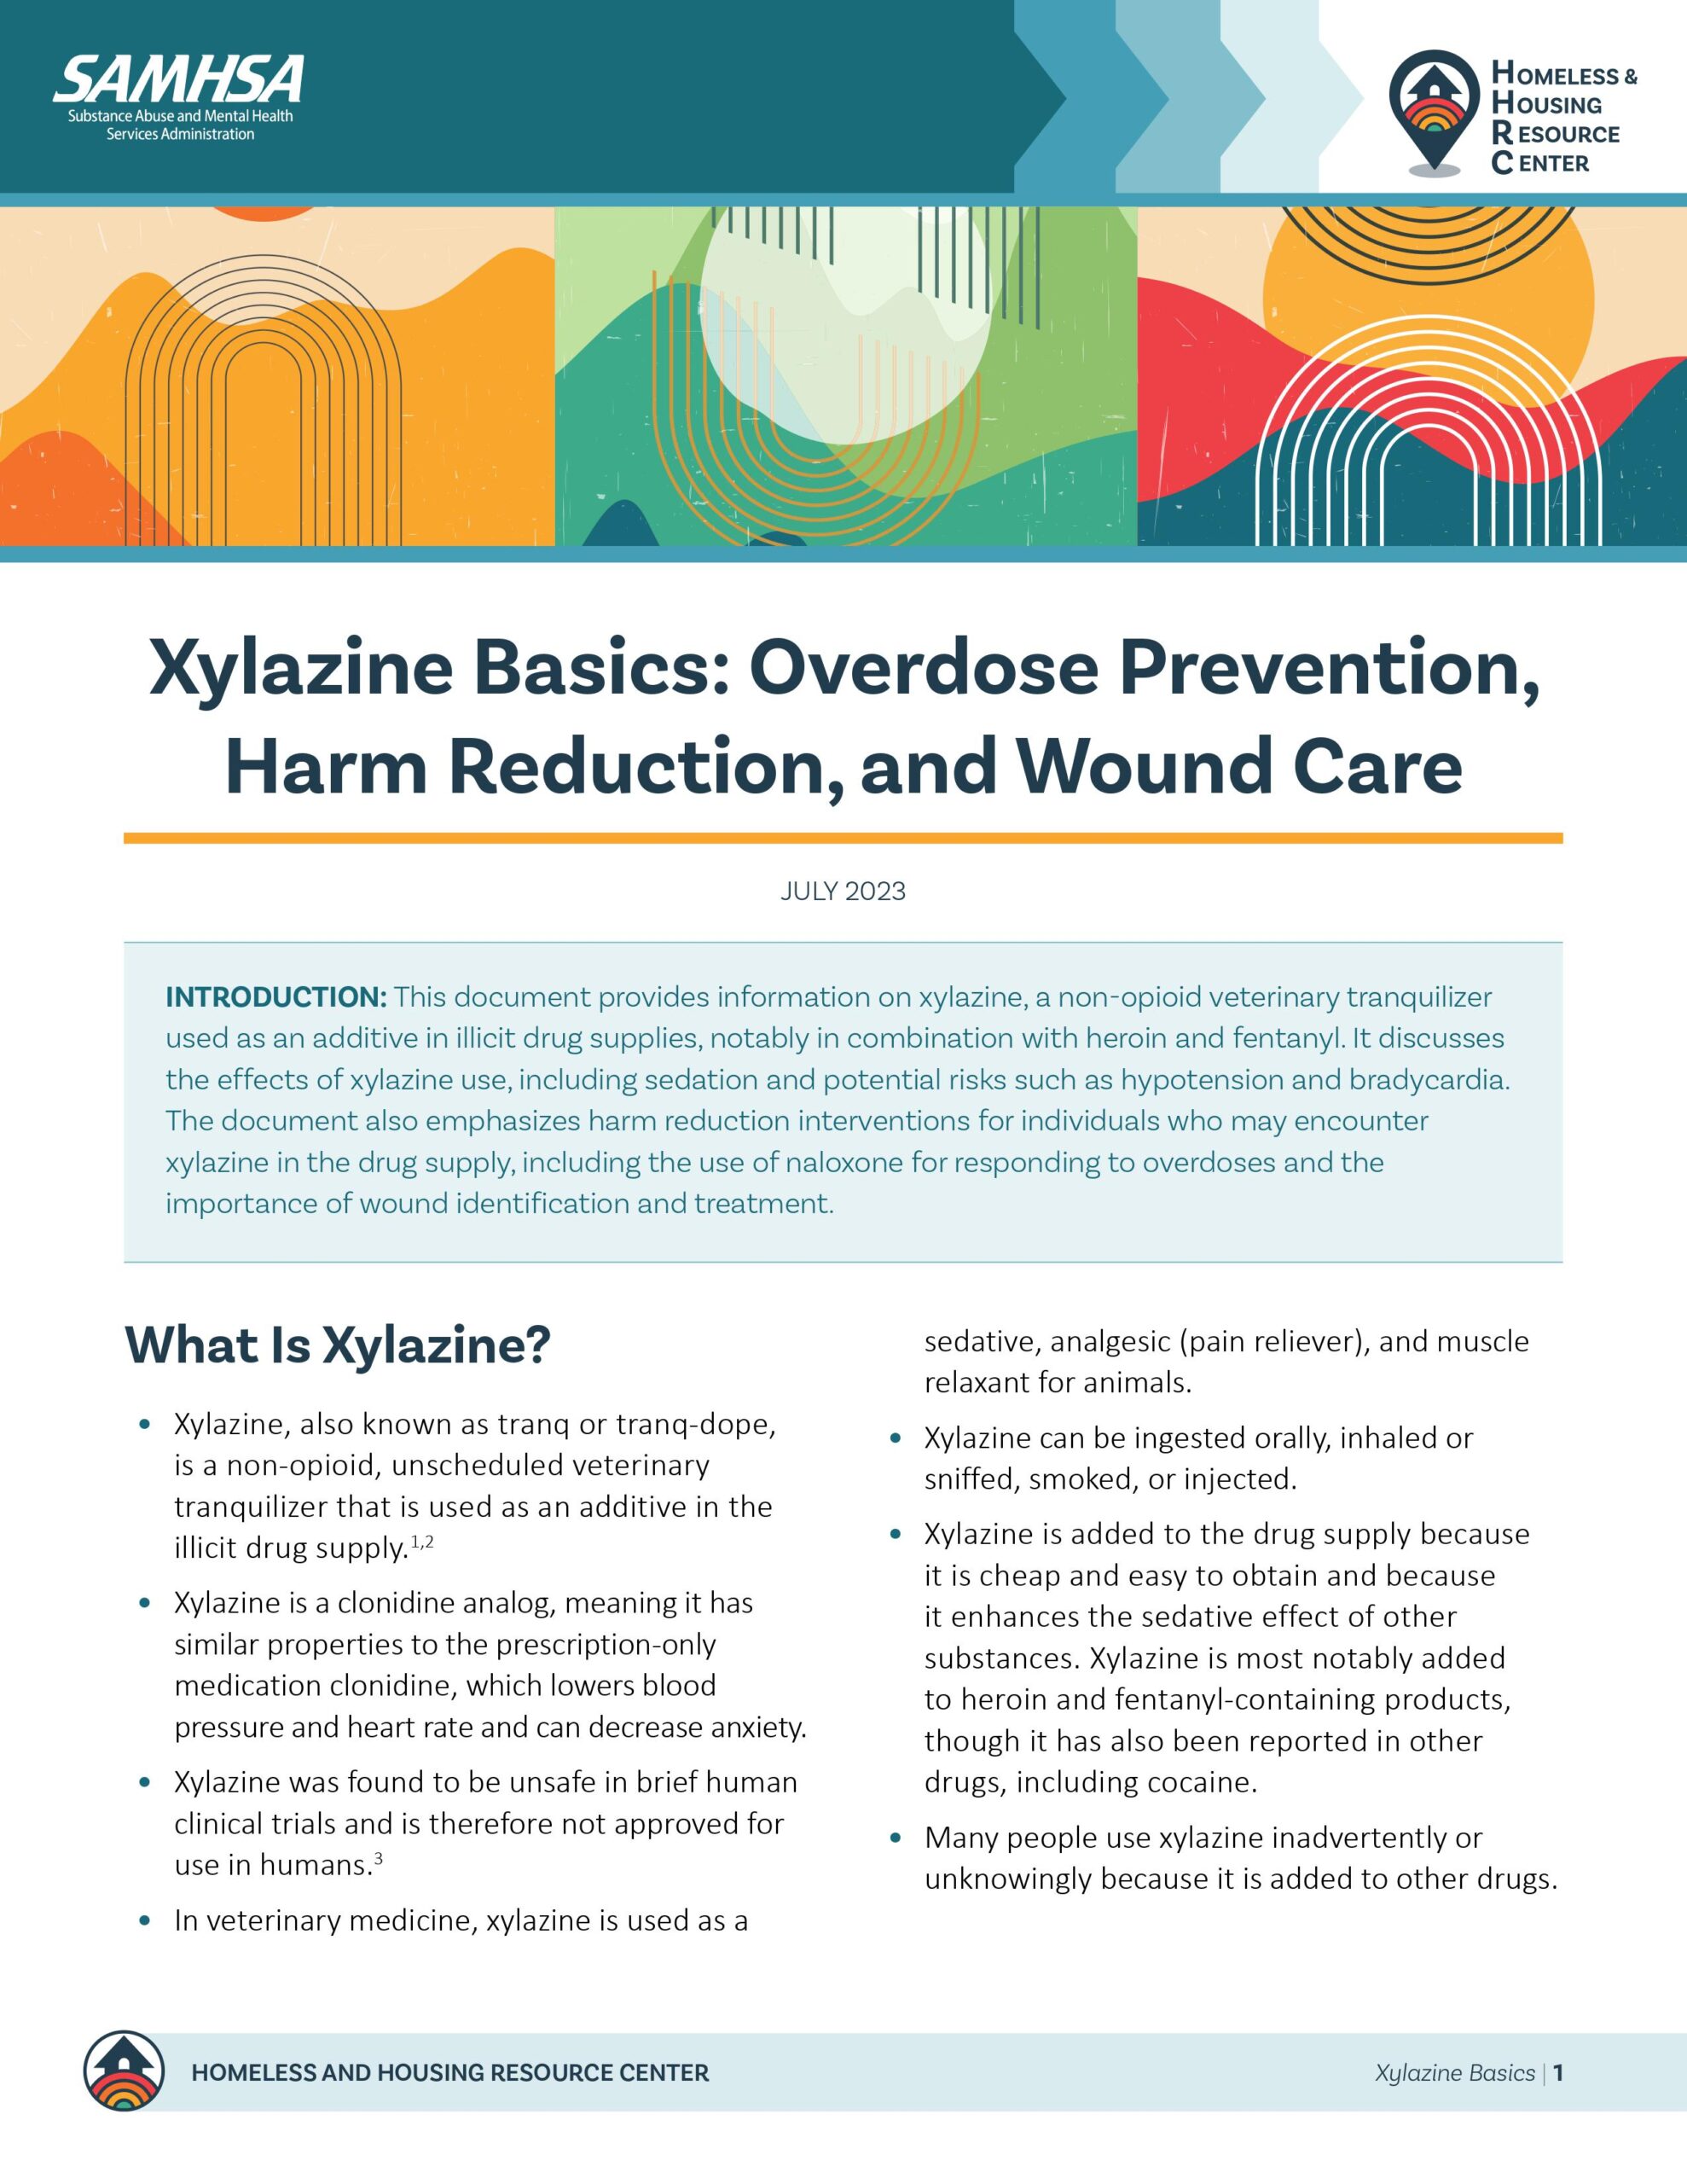 Xylazine Basics: Overdose Prevention, Harm Reduction, and Wound Care Page 1